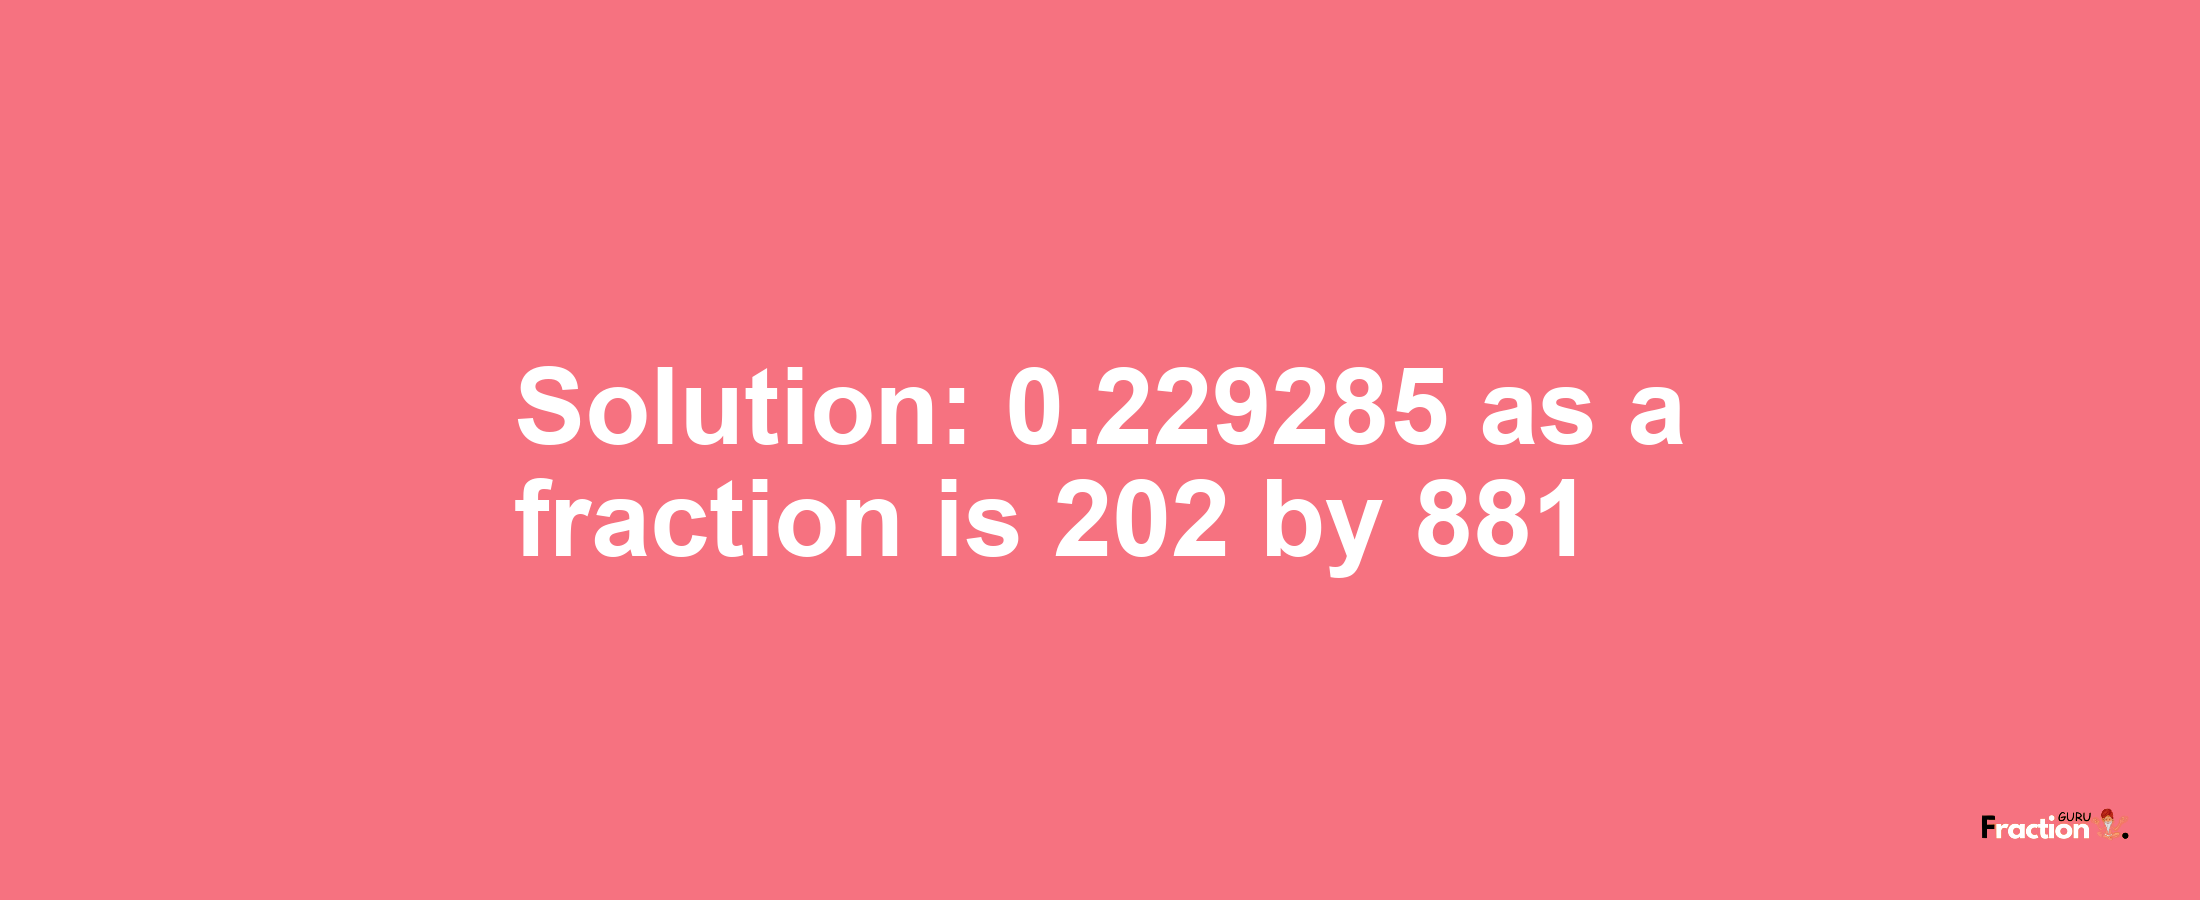 Solution:0.229285 as a fraction is 202/881